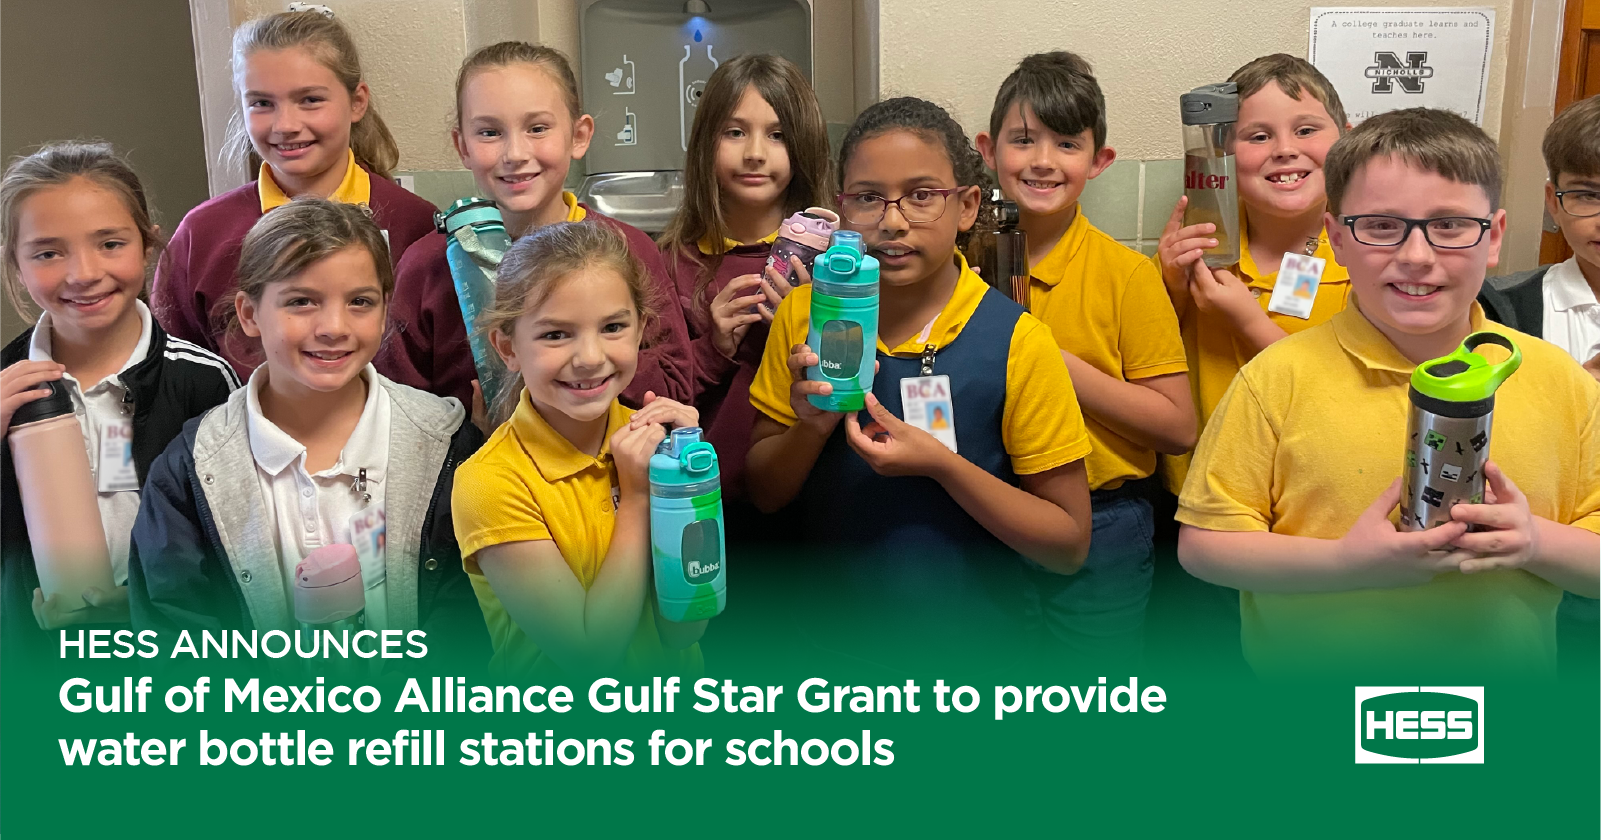 Hess Provides Water Bottle Refill Stations for Schools